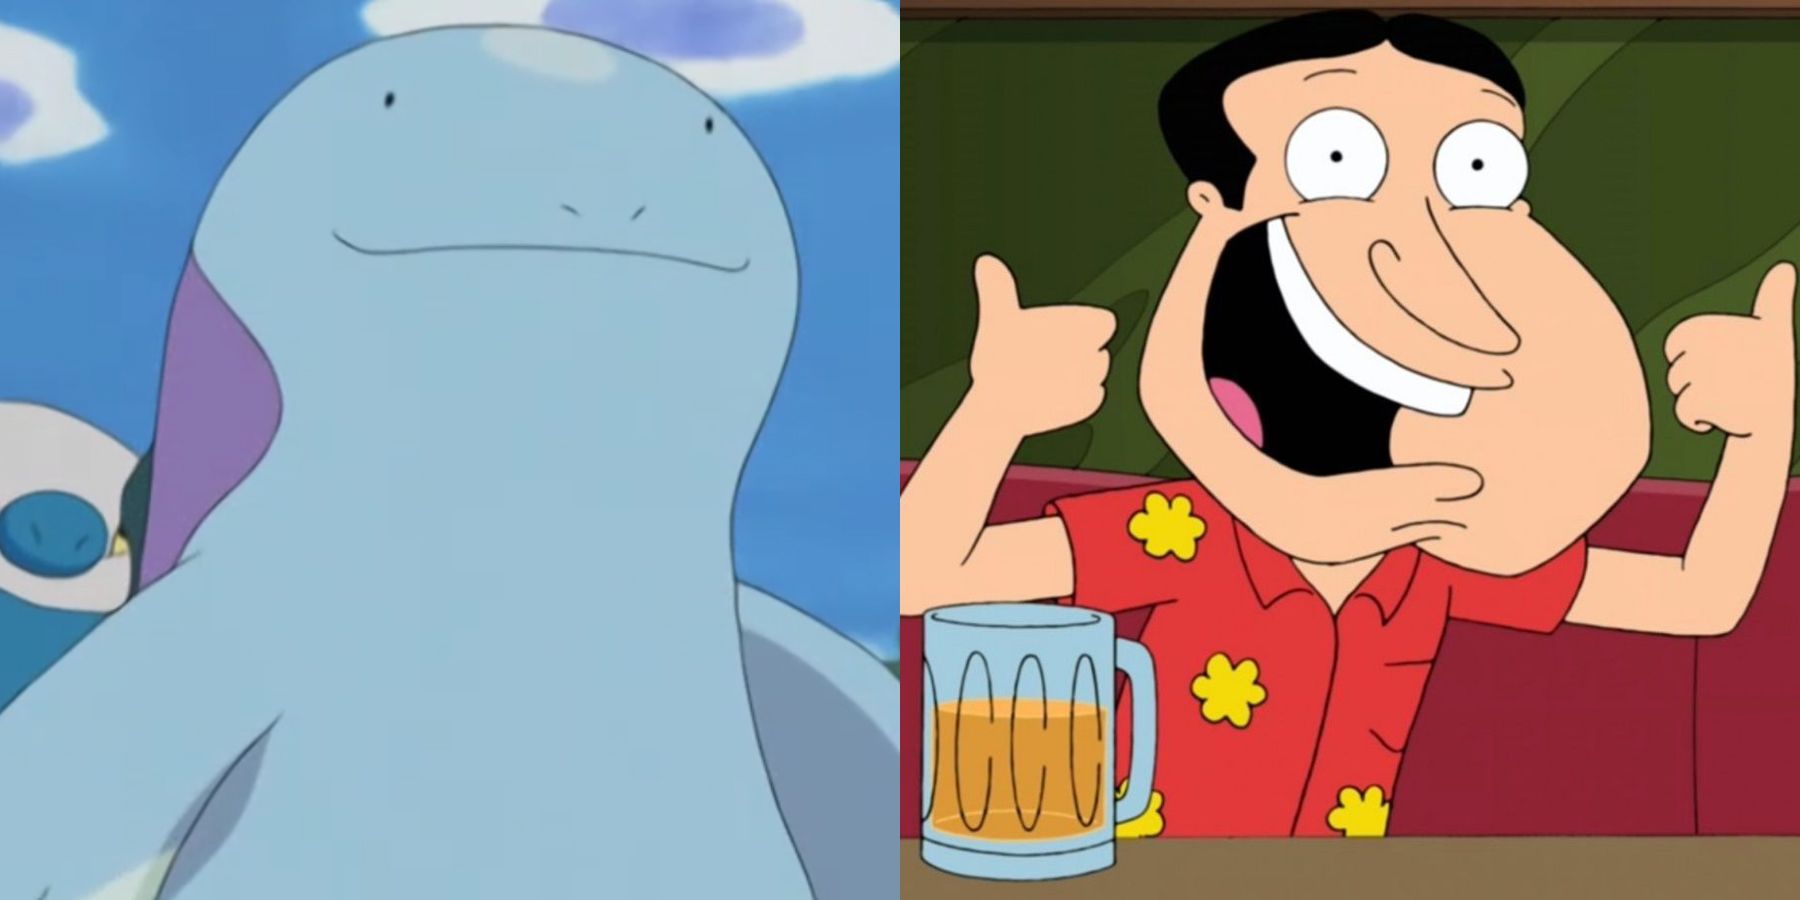 Bizarre Pokemon Fan Art Combines Quagsire With Quagmire from Family Guy